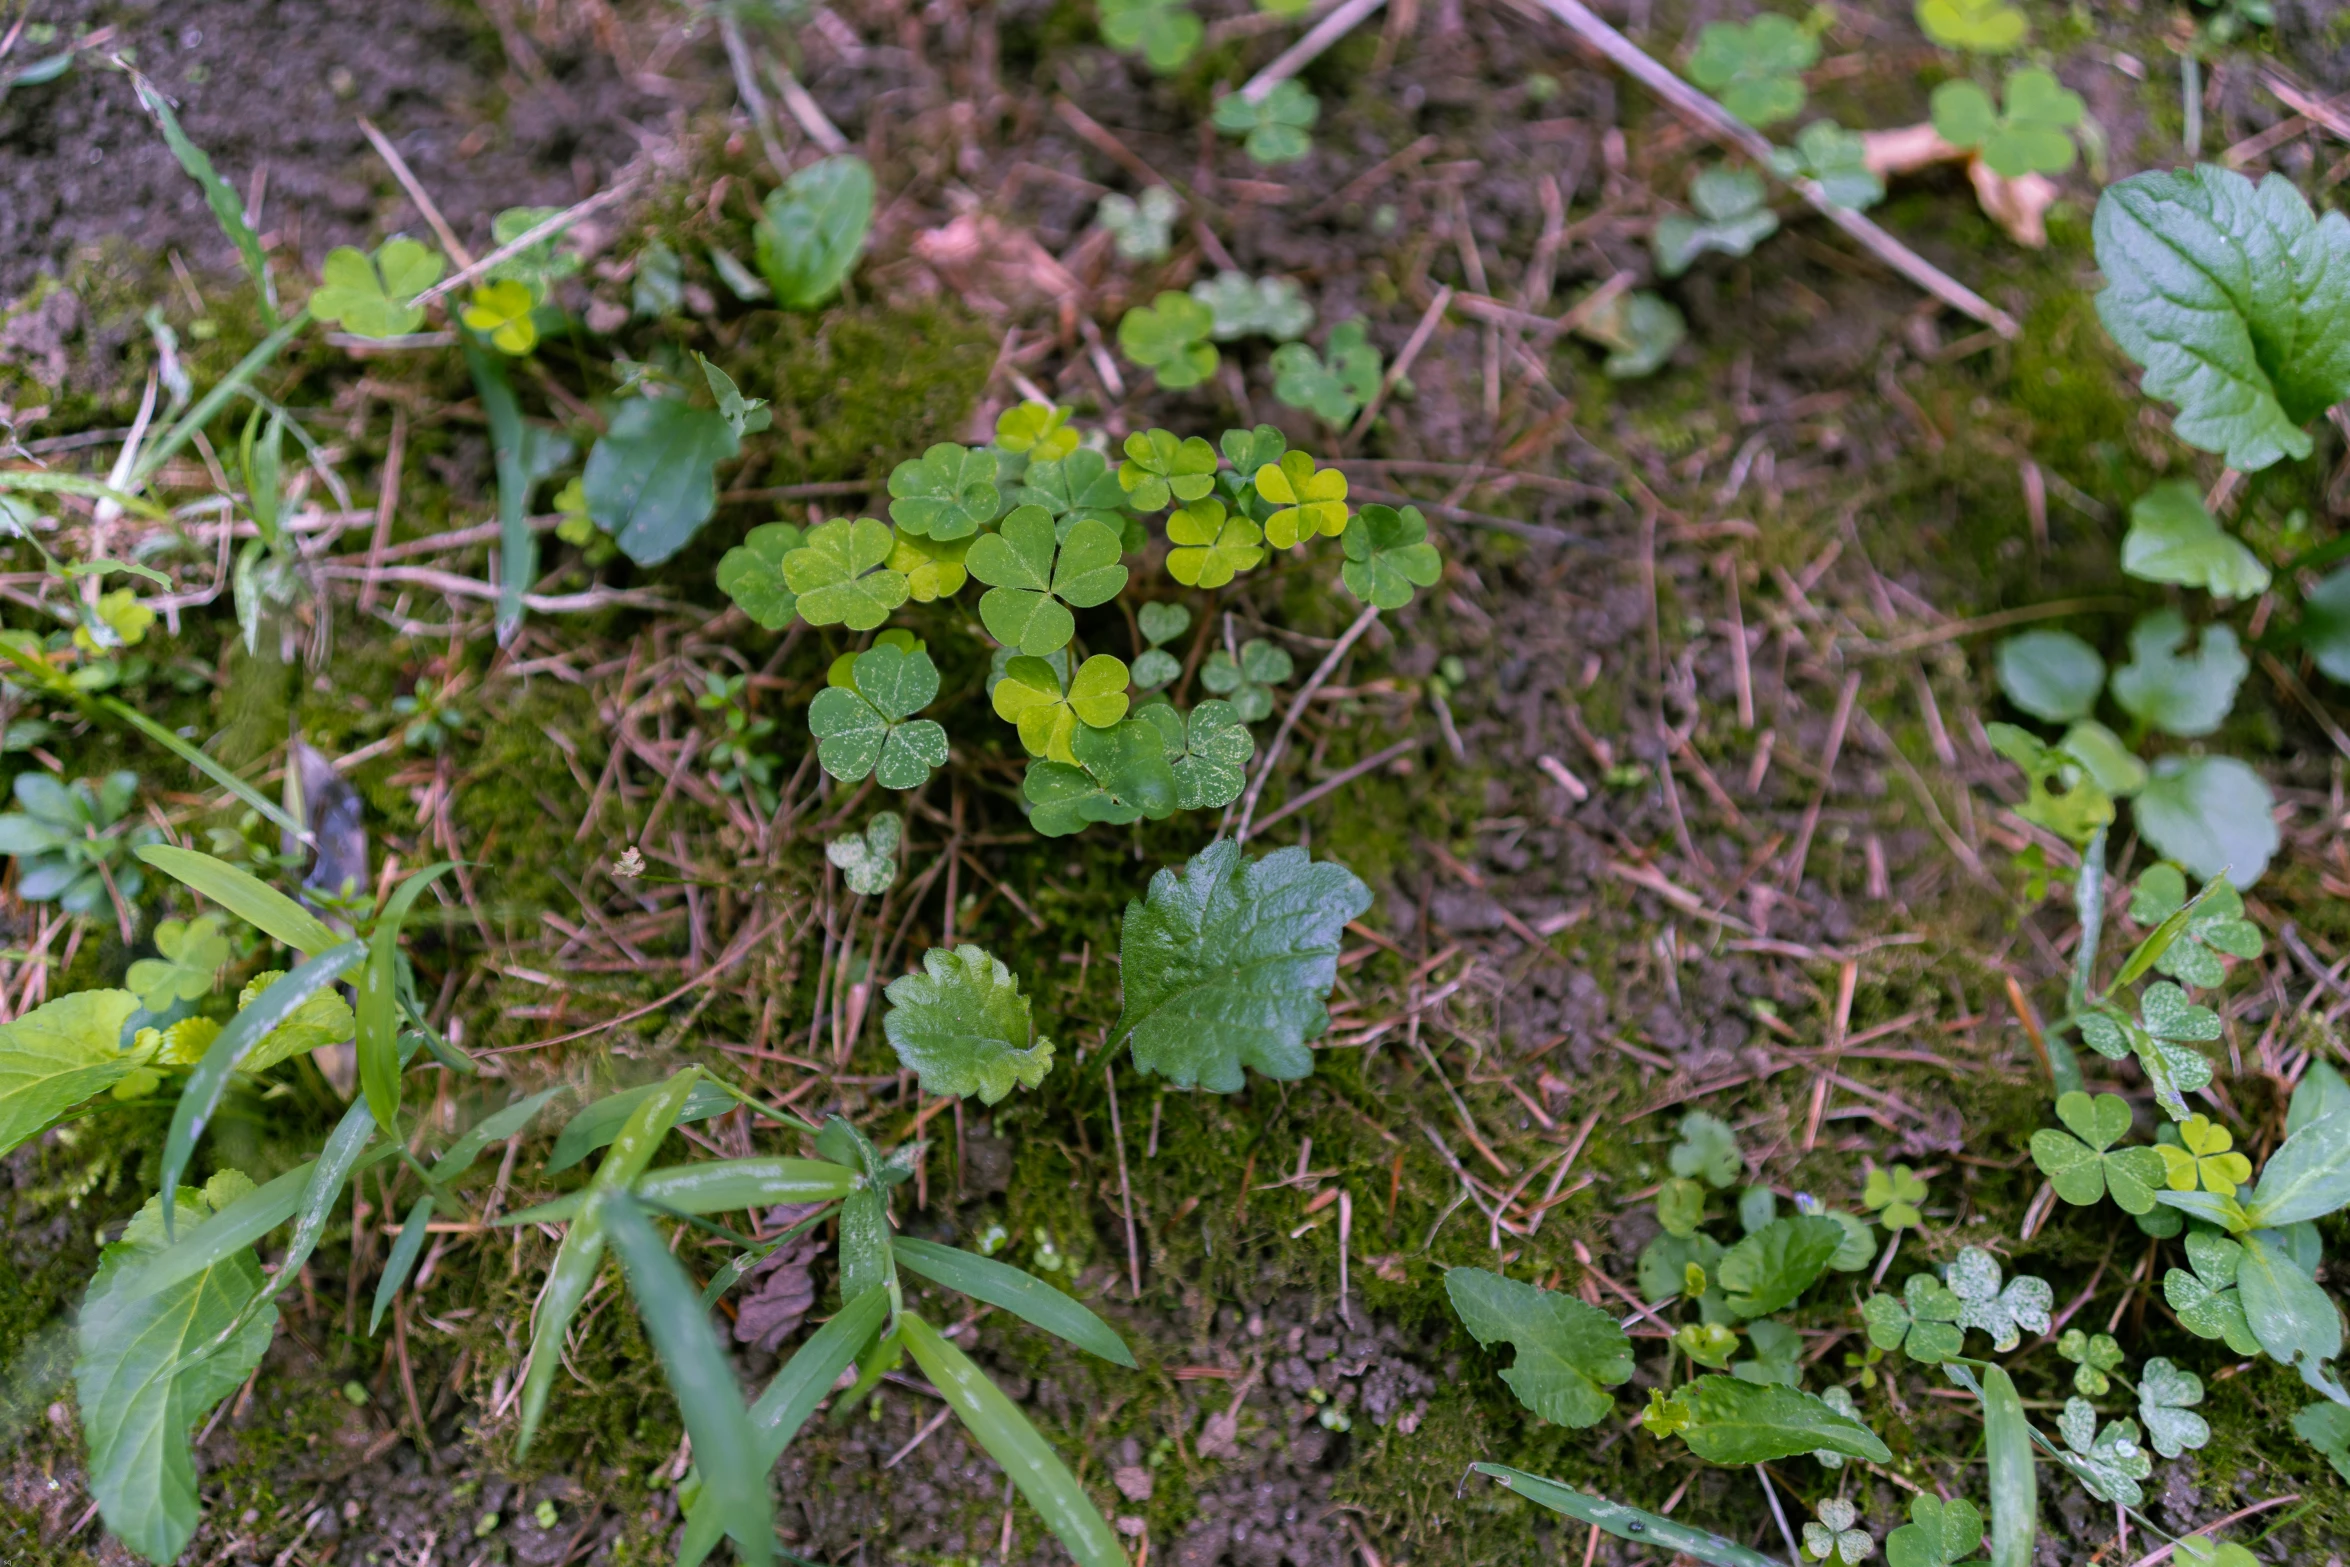 several green plants growing in the dirt